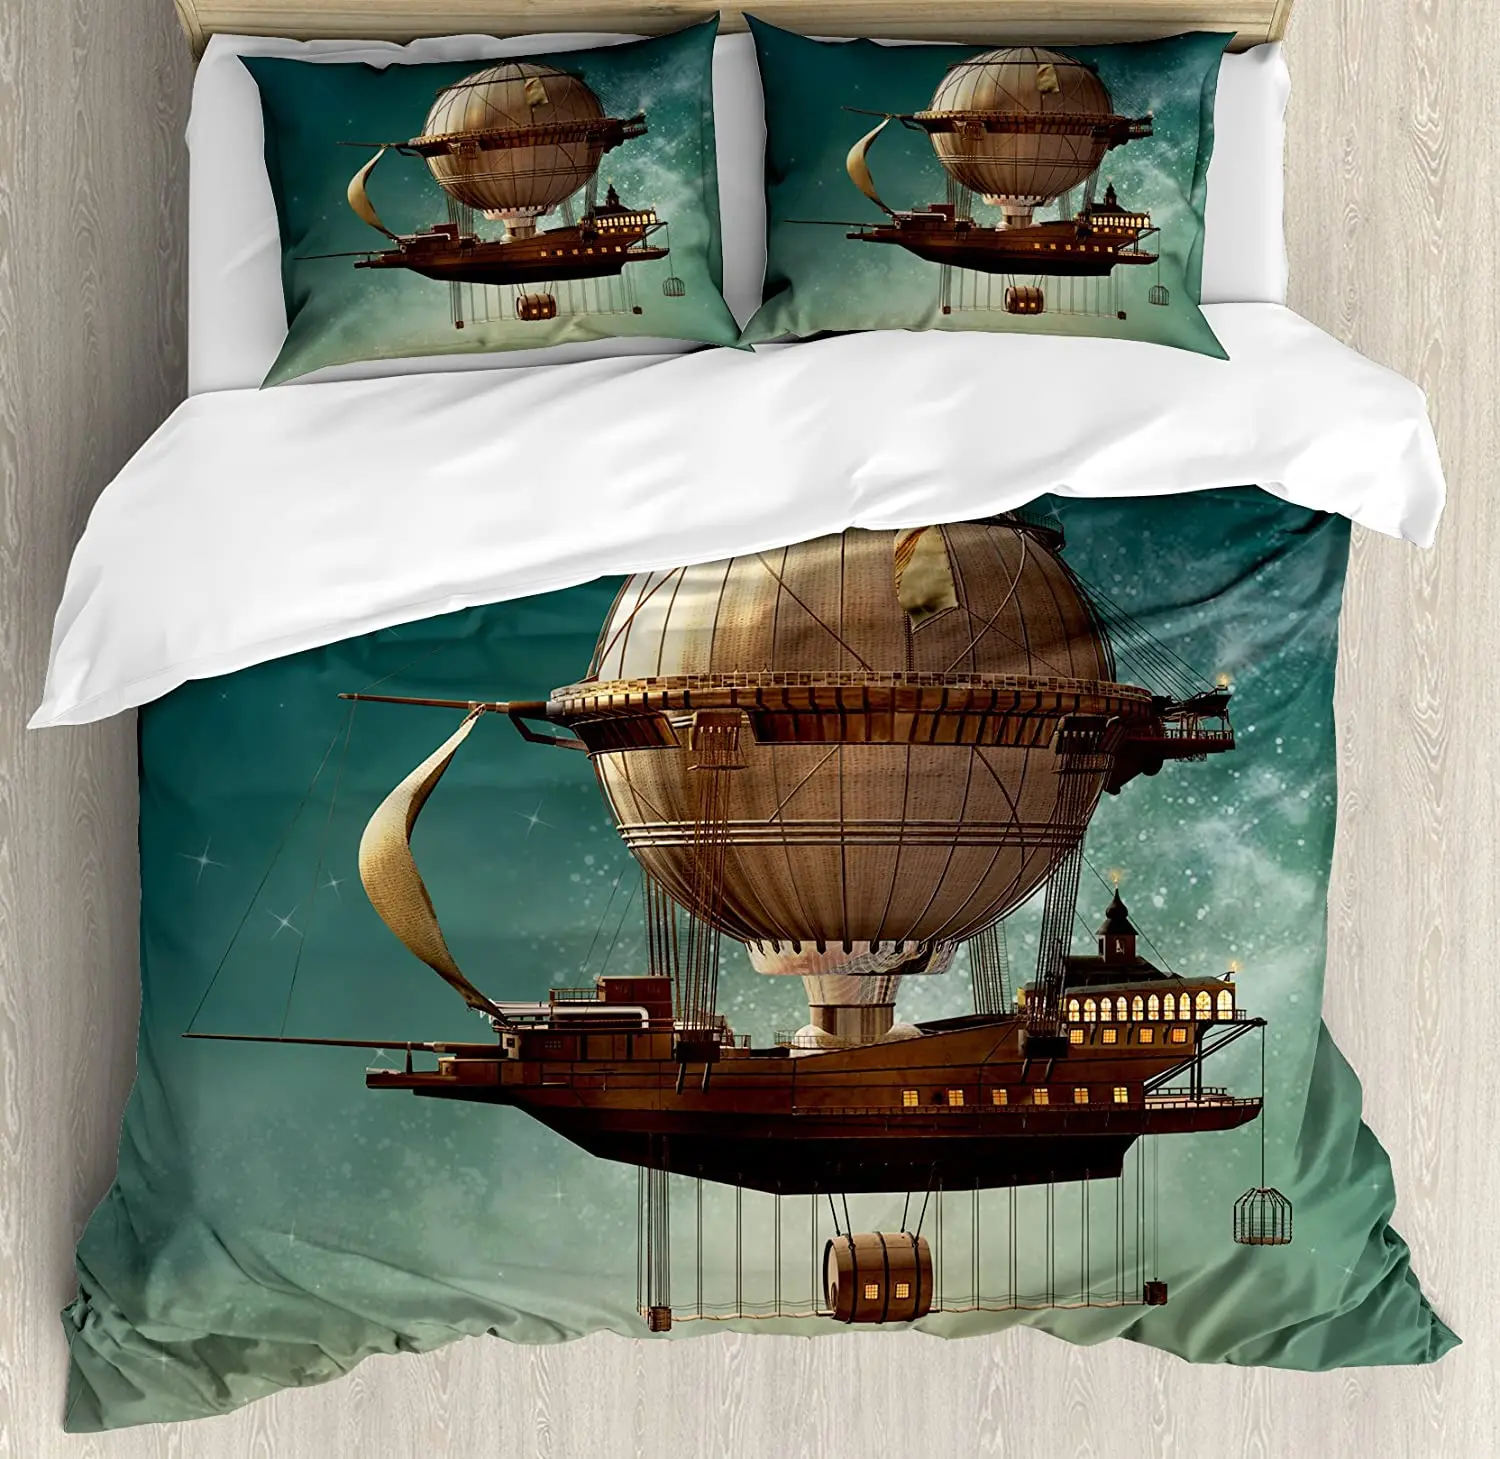 

Fantasy Double Bed Duvet Cover Set Surreal Sky Scenery with Steampunk Airship Fairy Sci Fi Stardust Space Image Bedding Set